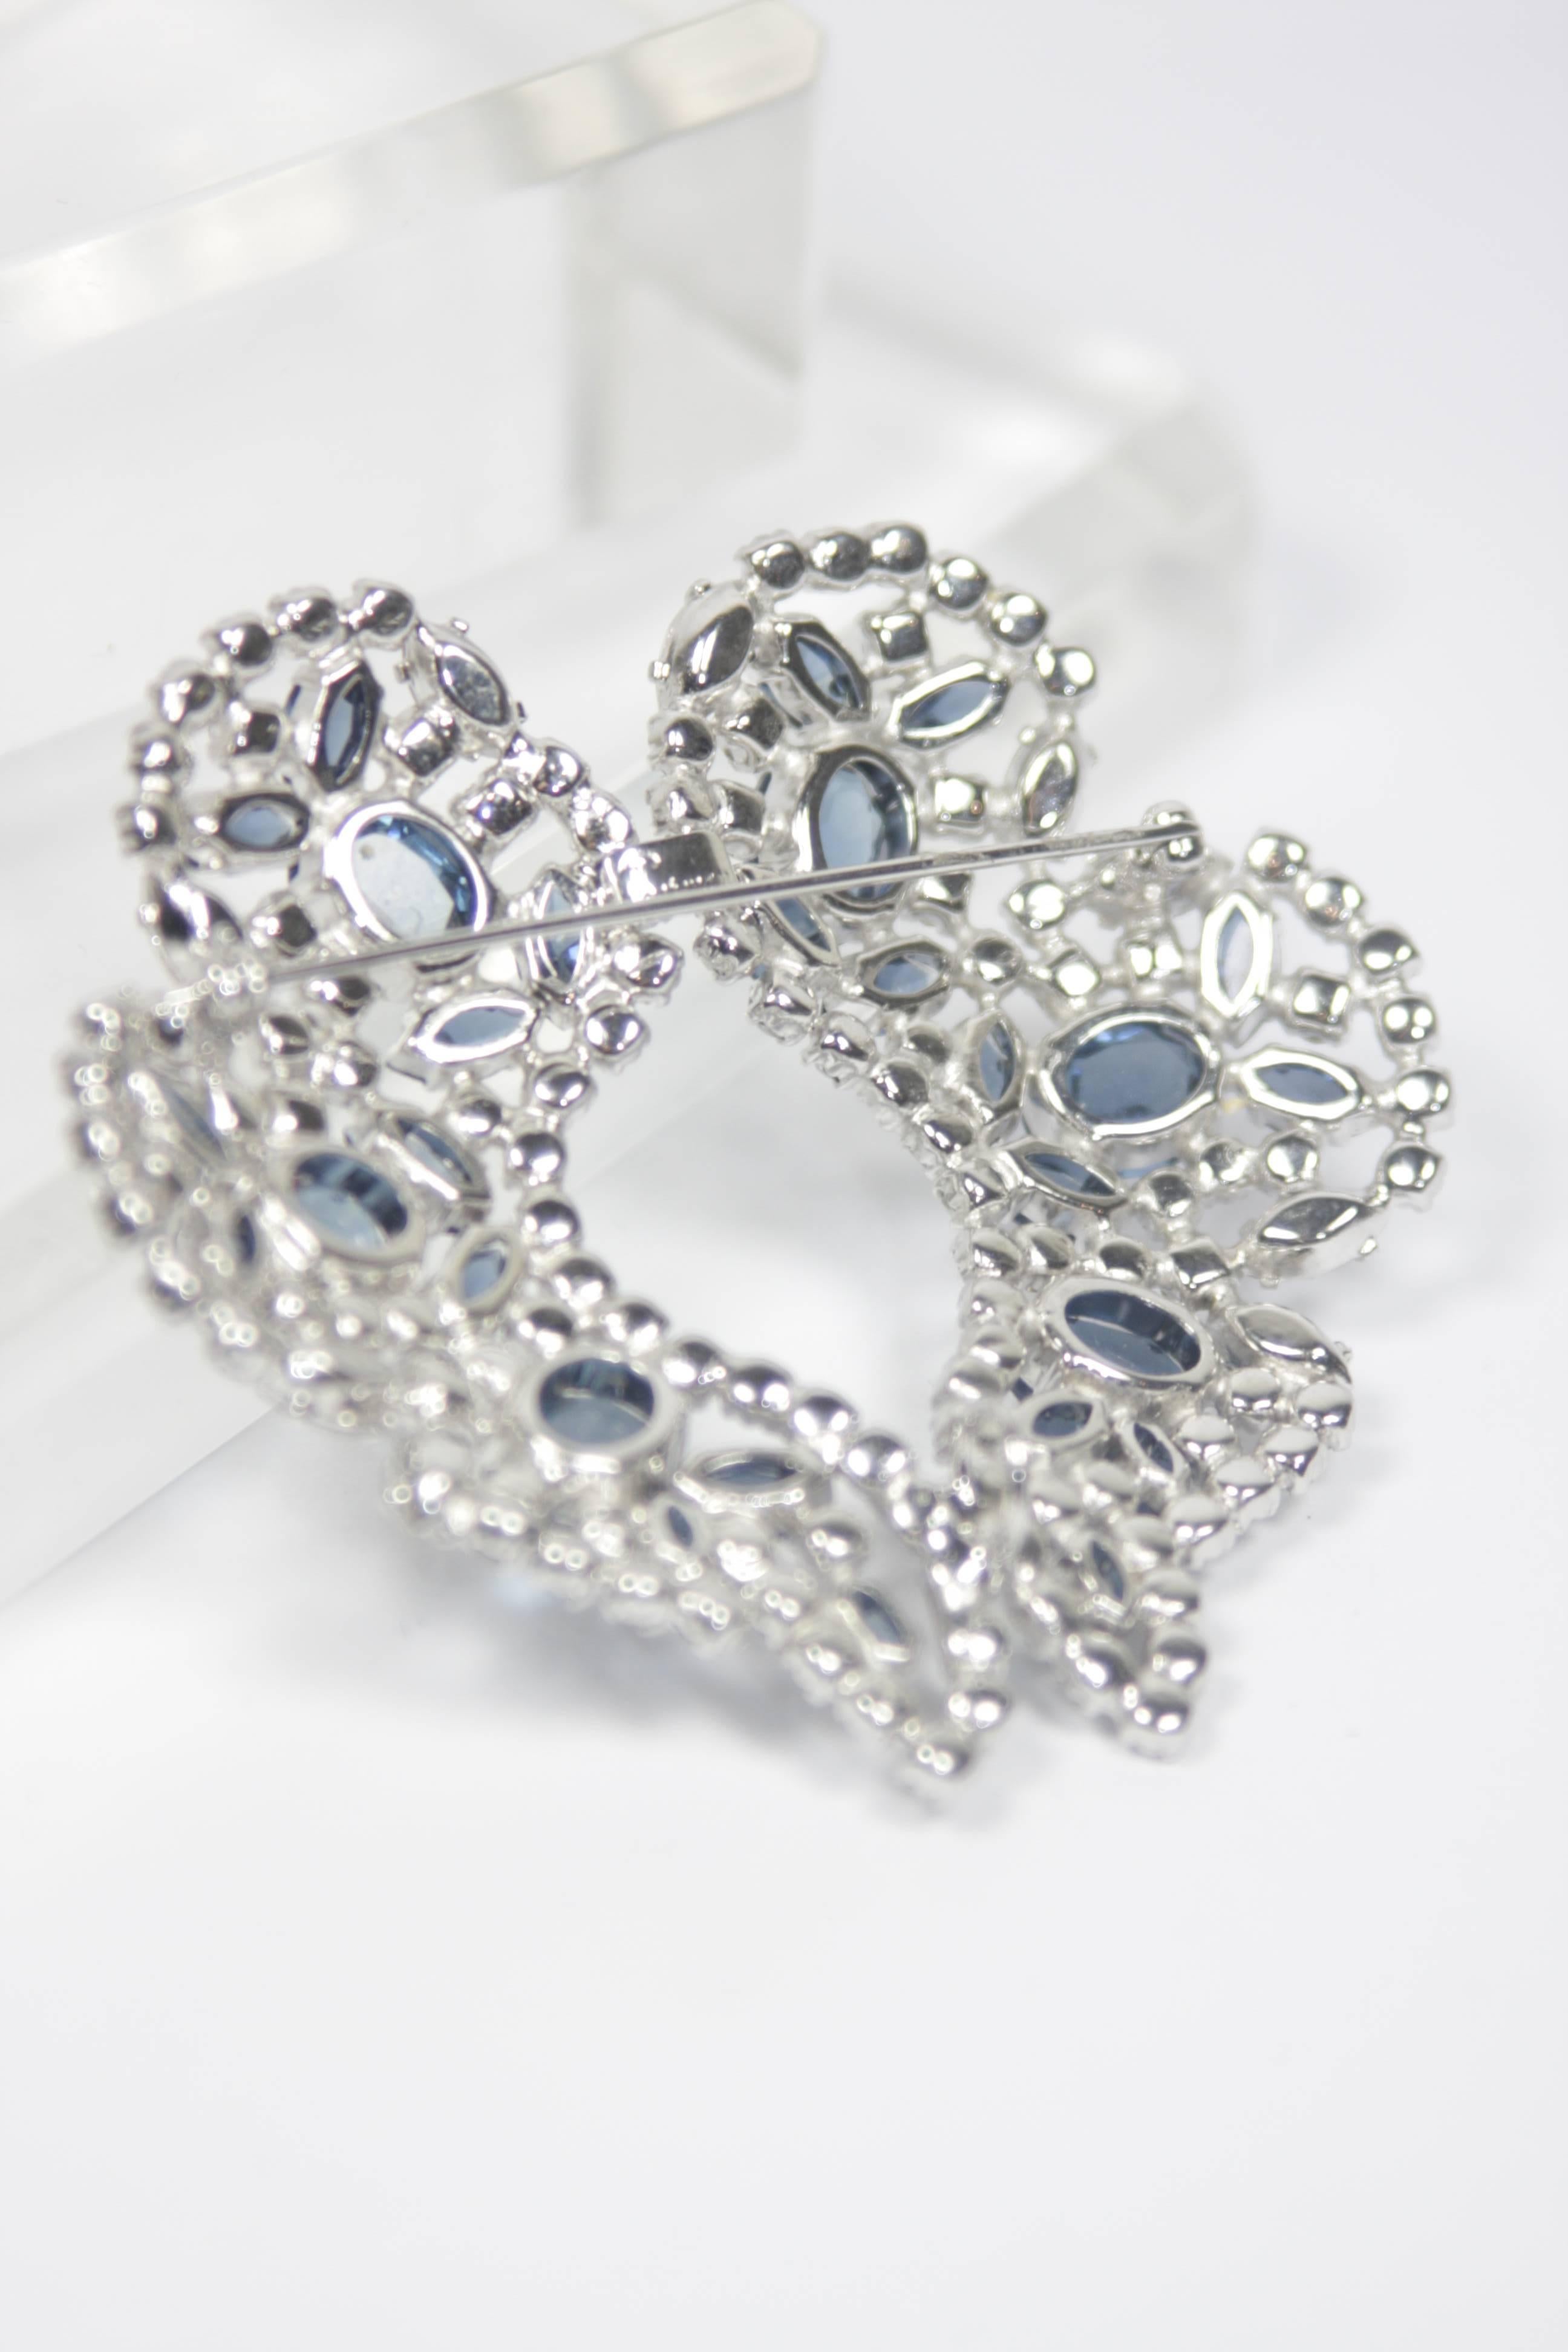 SHERMAN White and Sapphire Rhinestone Brooch  In Excellent Condition For Sale In Los Angeles, CA